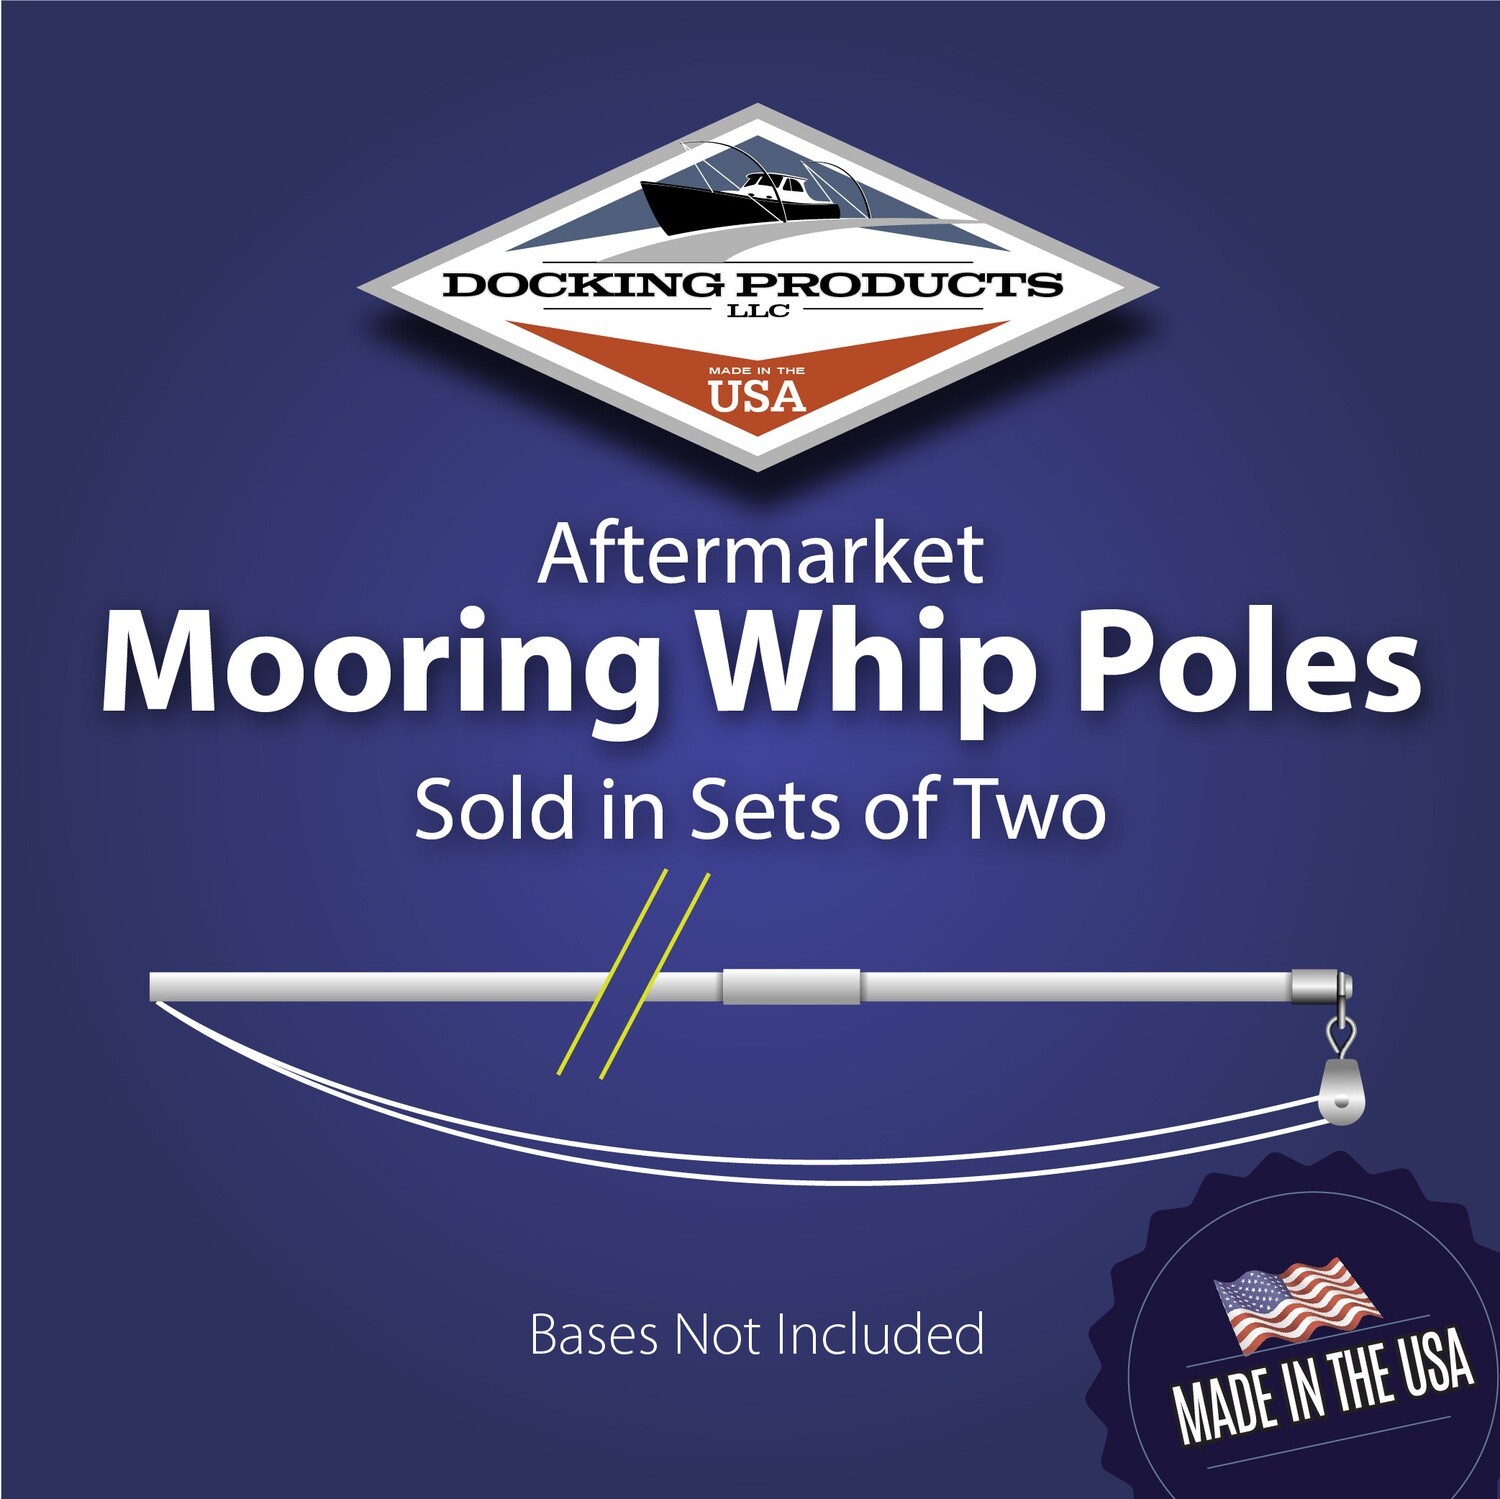 After Market Mooring Whip Poles